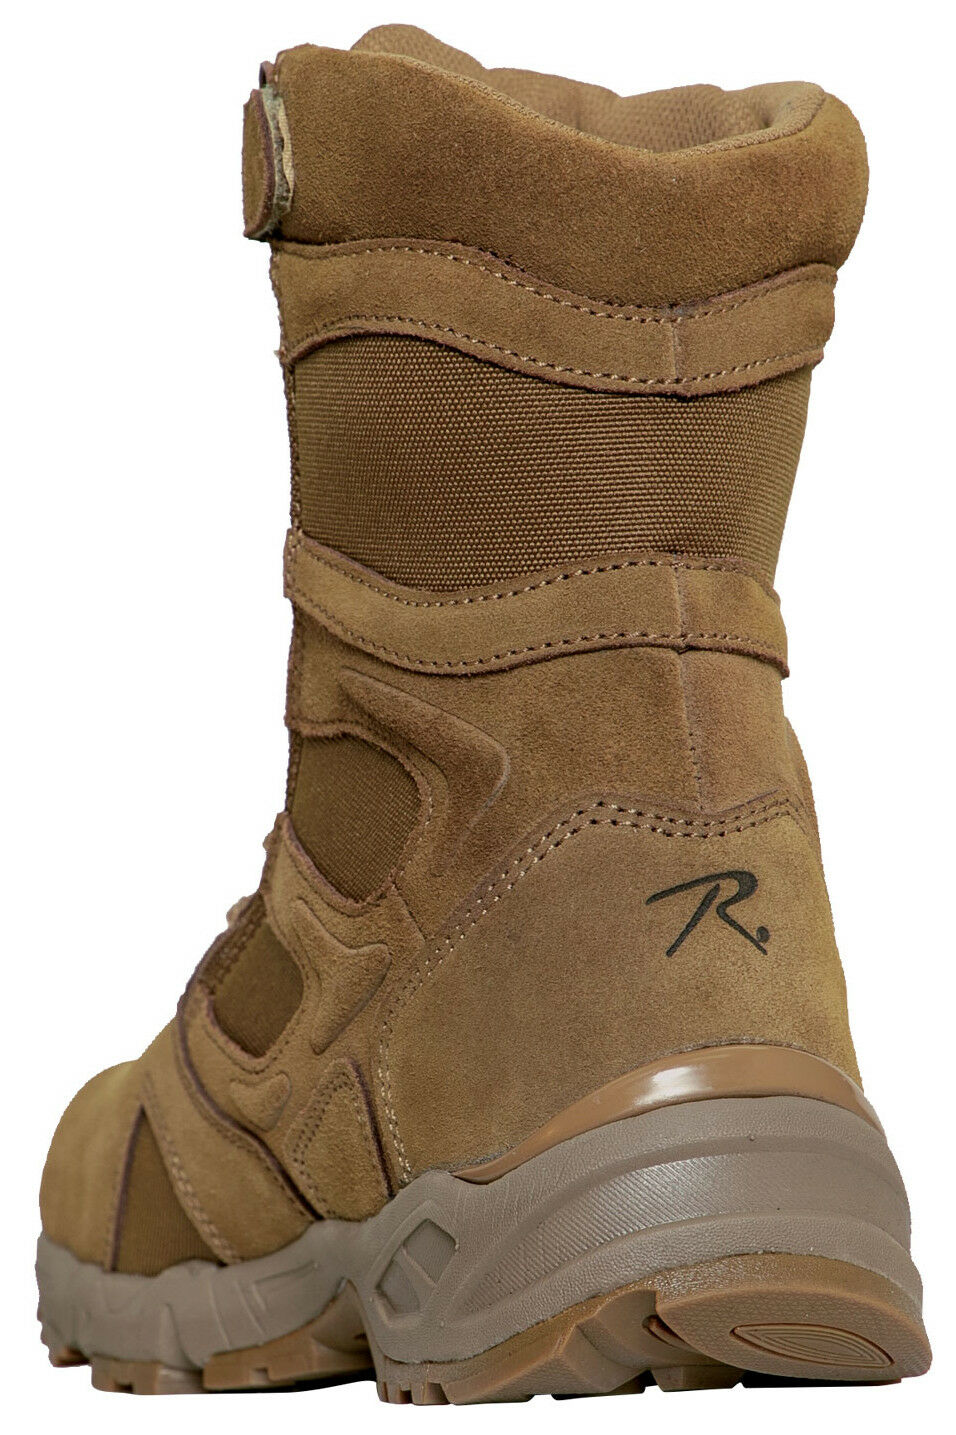 Rothco Forced Entry Deployment Boots With Side Zipper - 8 Inch - Coyote Brown AR-671